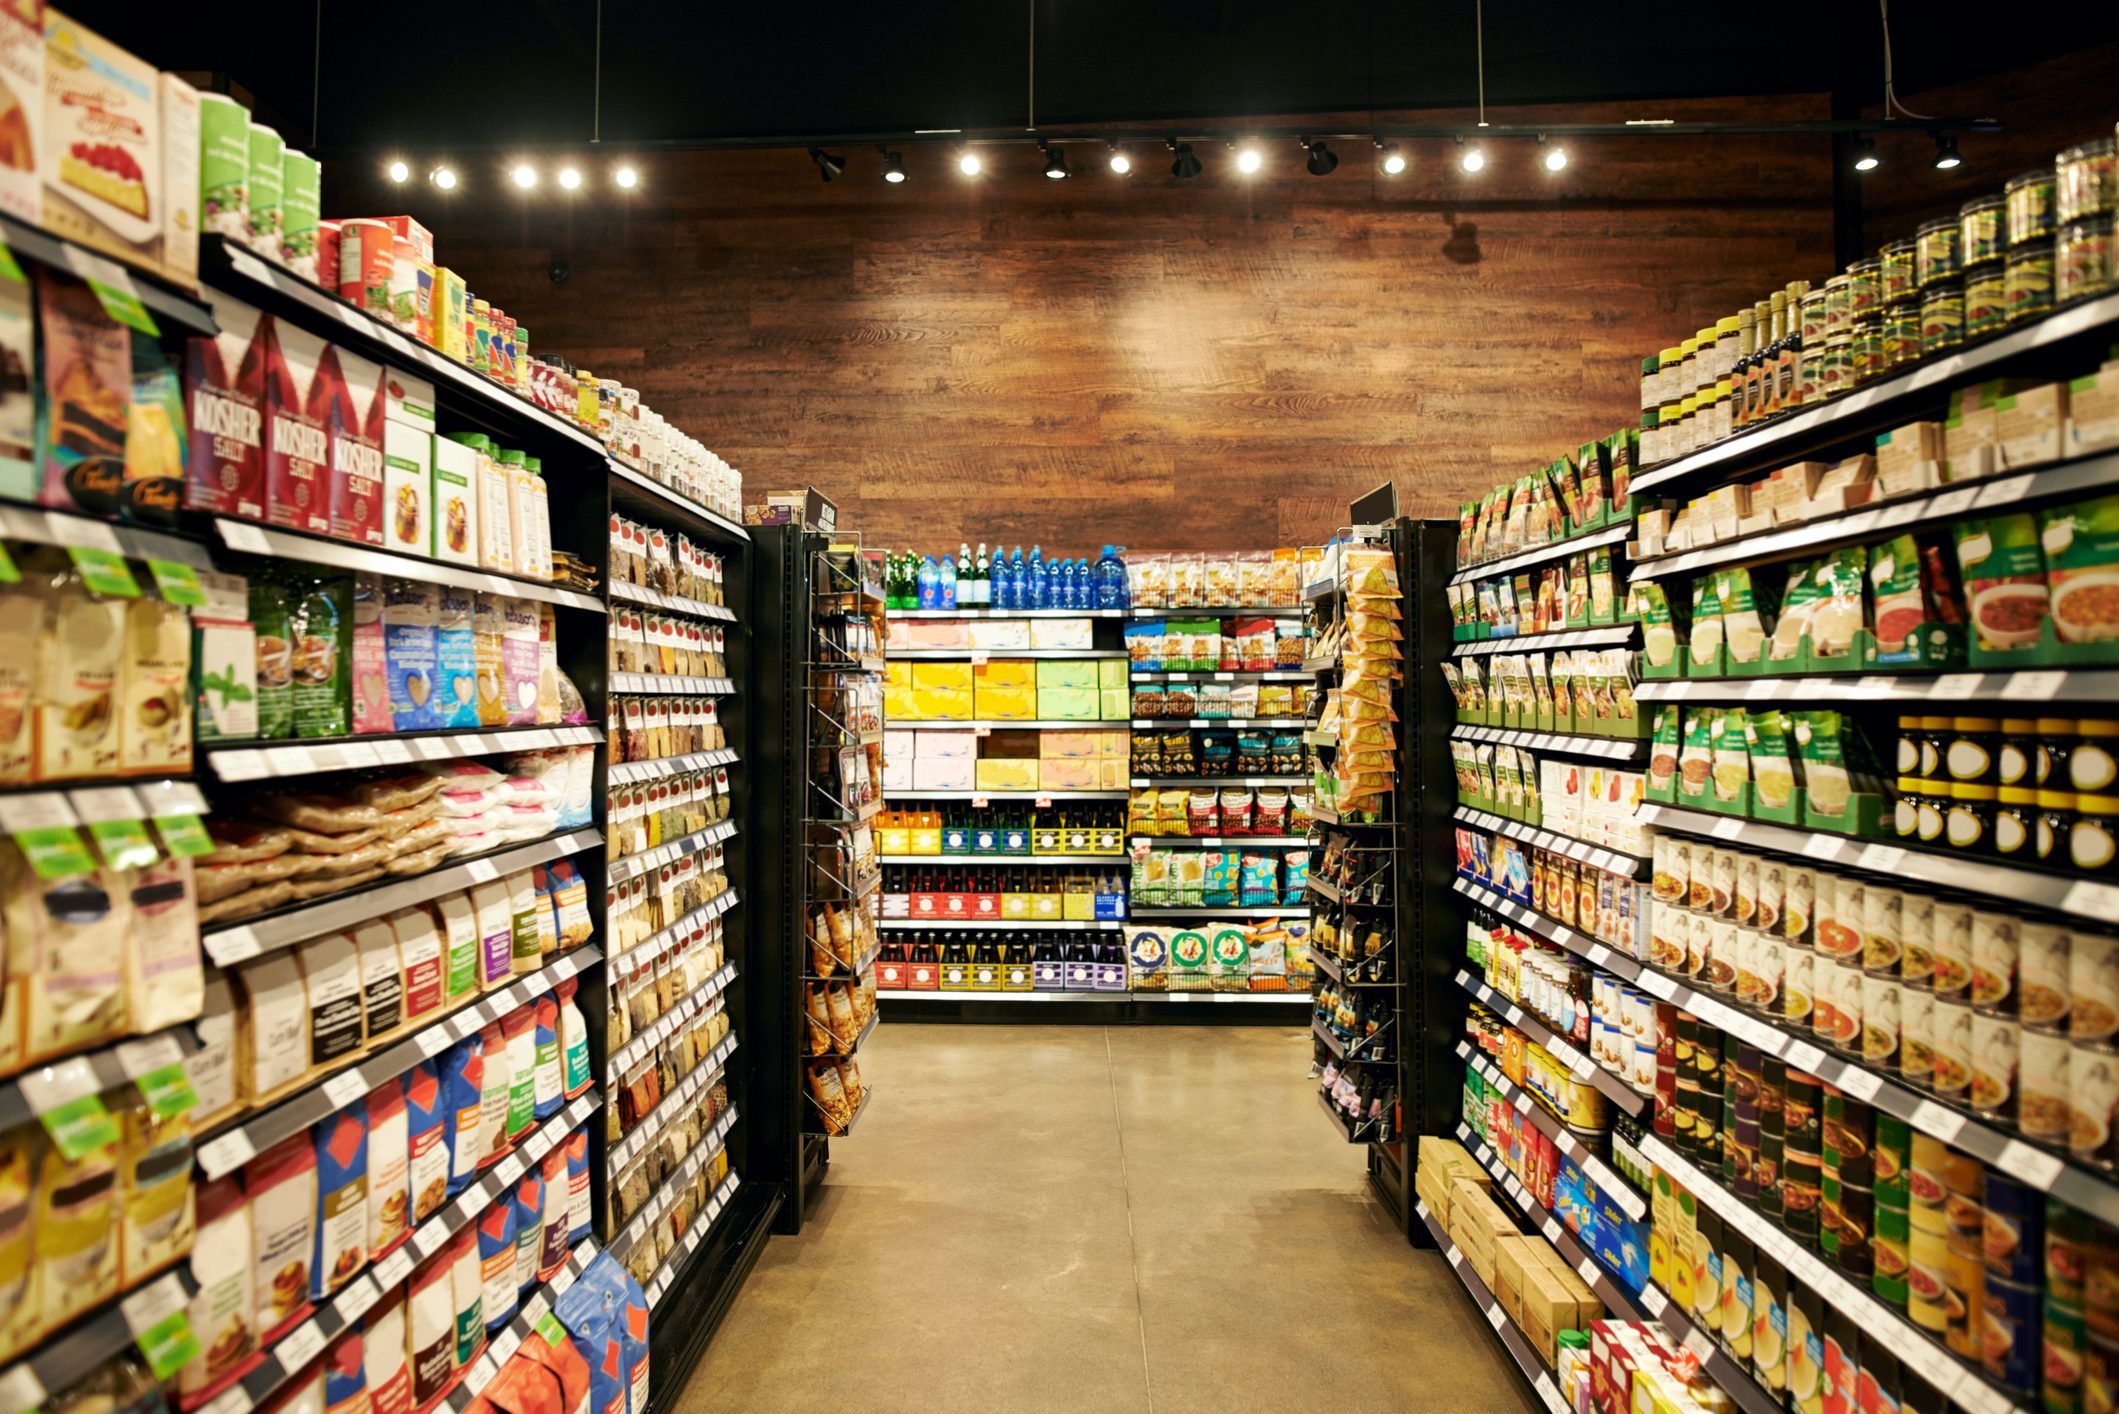 This Grocery Store Has the Best Reputation, Study Says